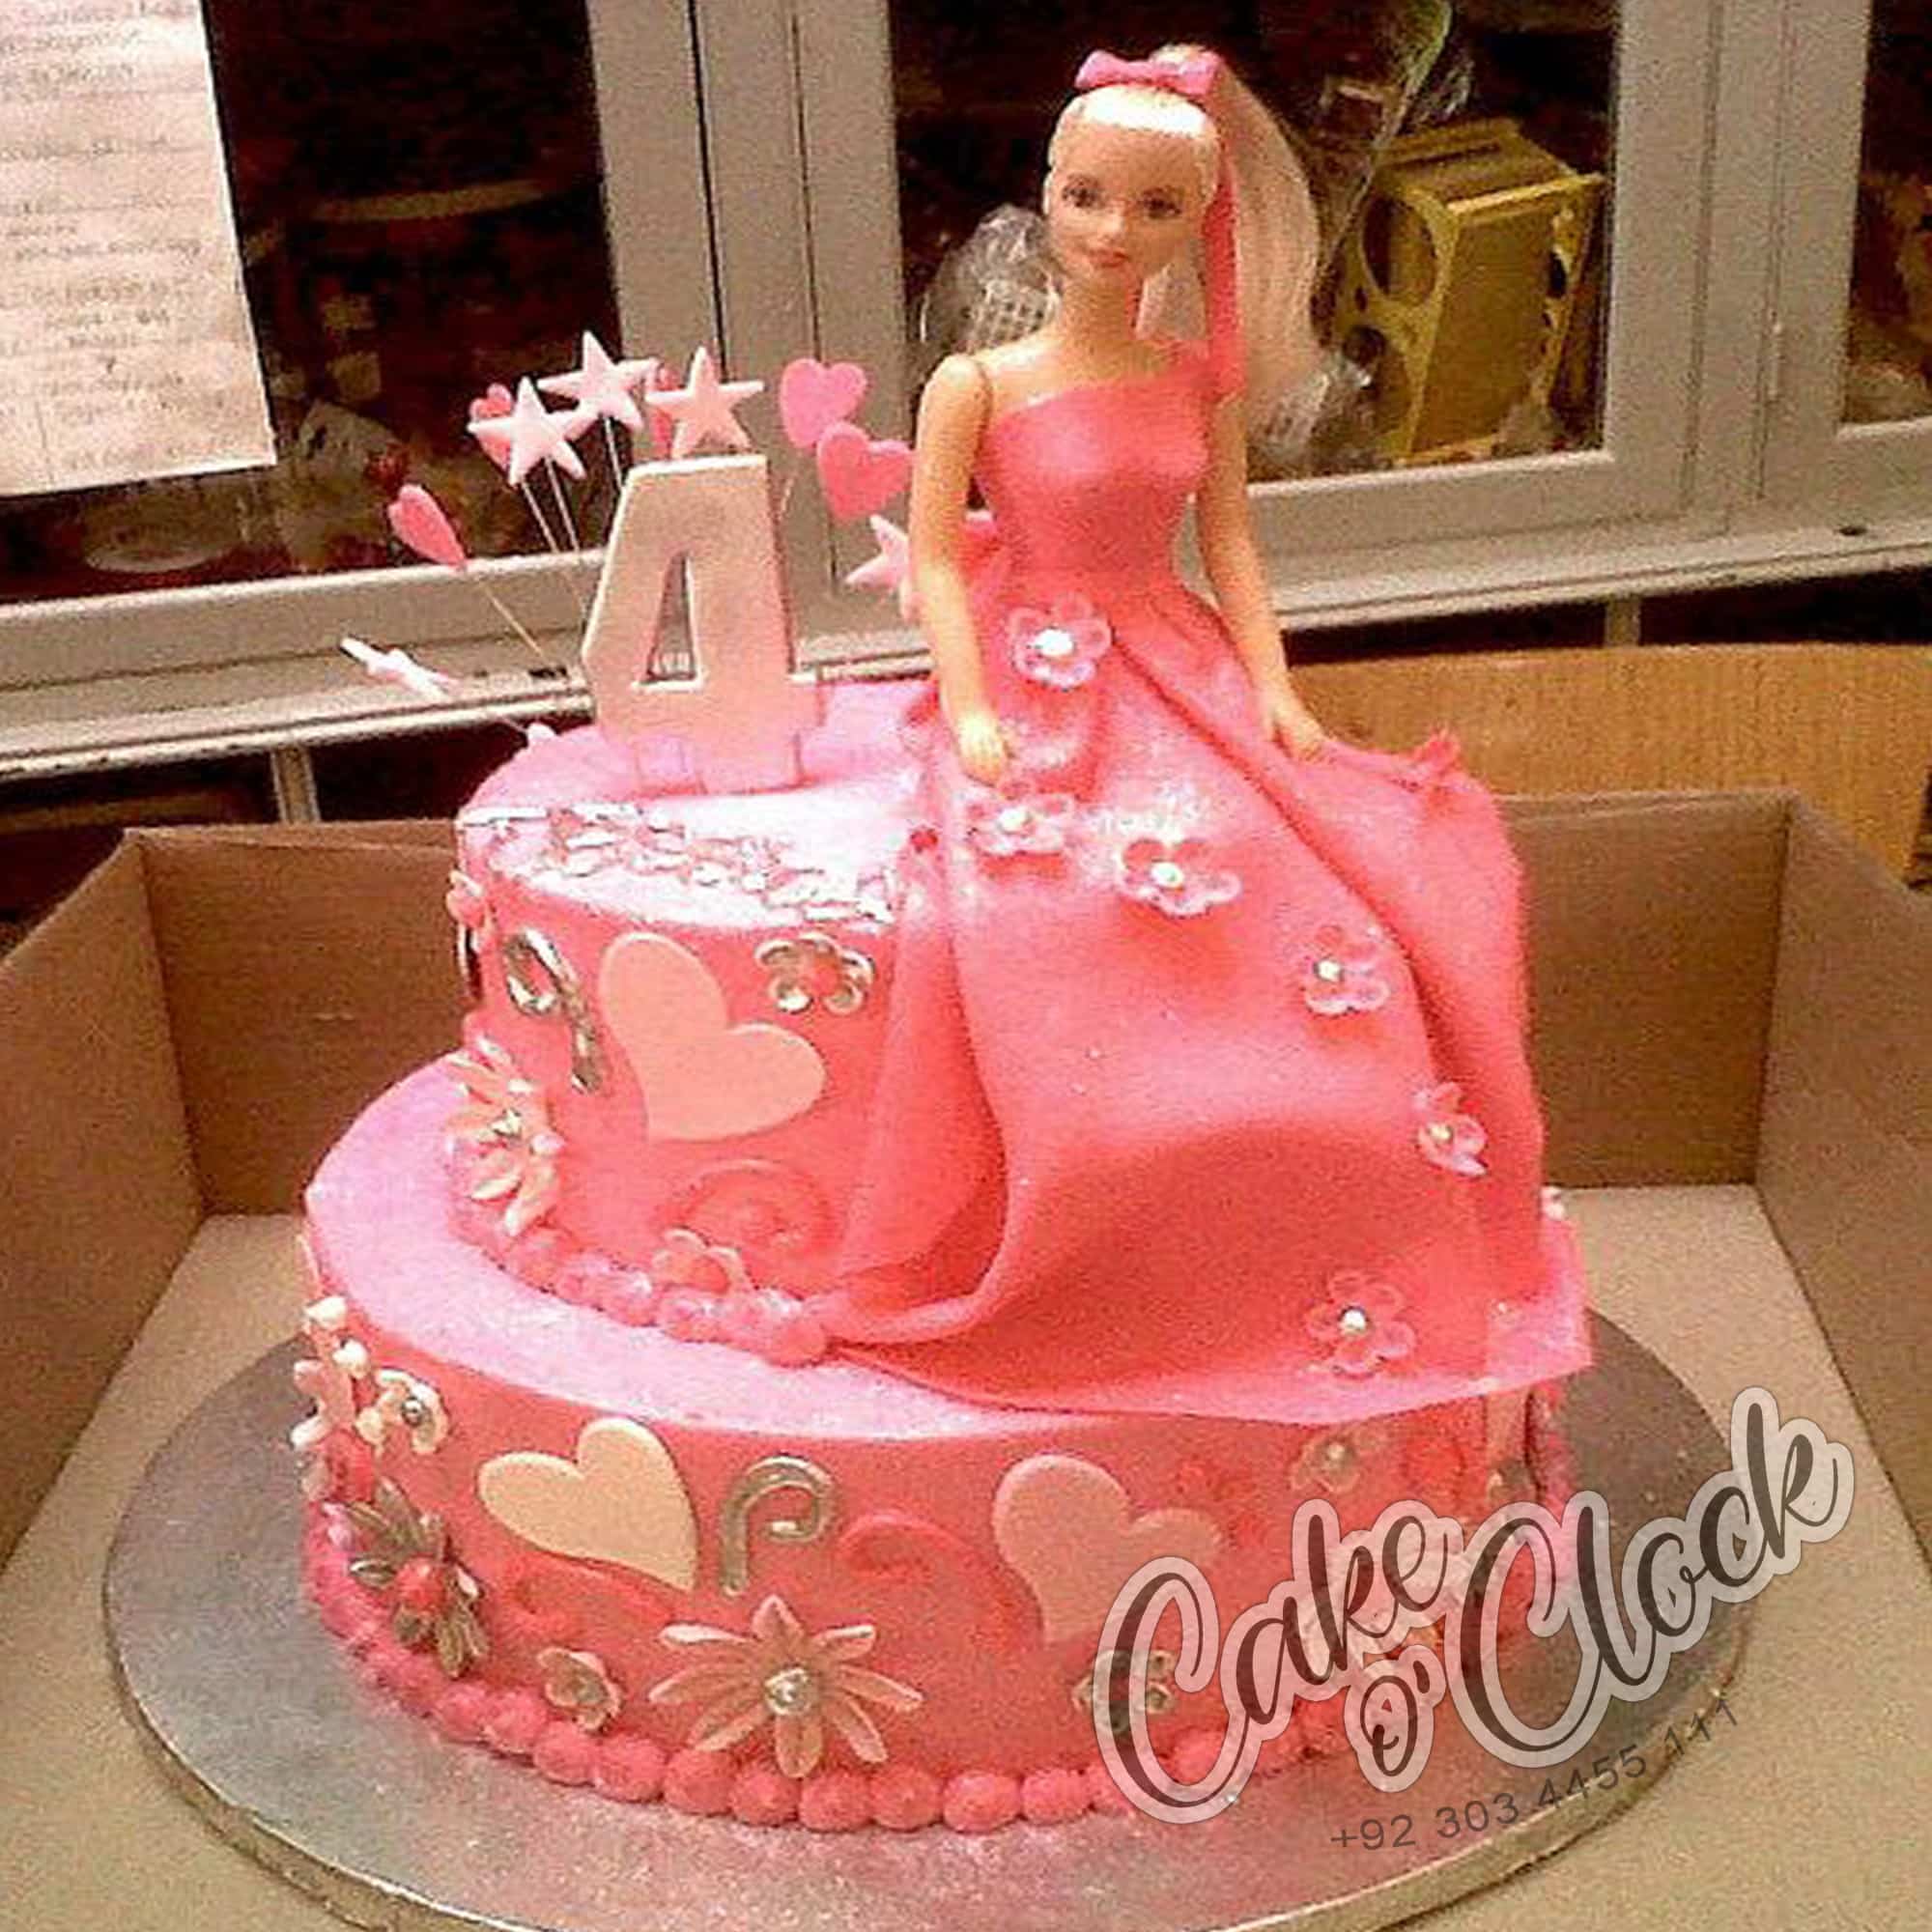 Order a Cake from a Local Bakery | Barbie birthday cake, Doll cake,  Rapunzel cake